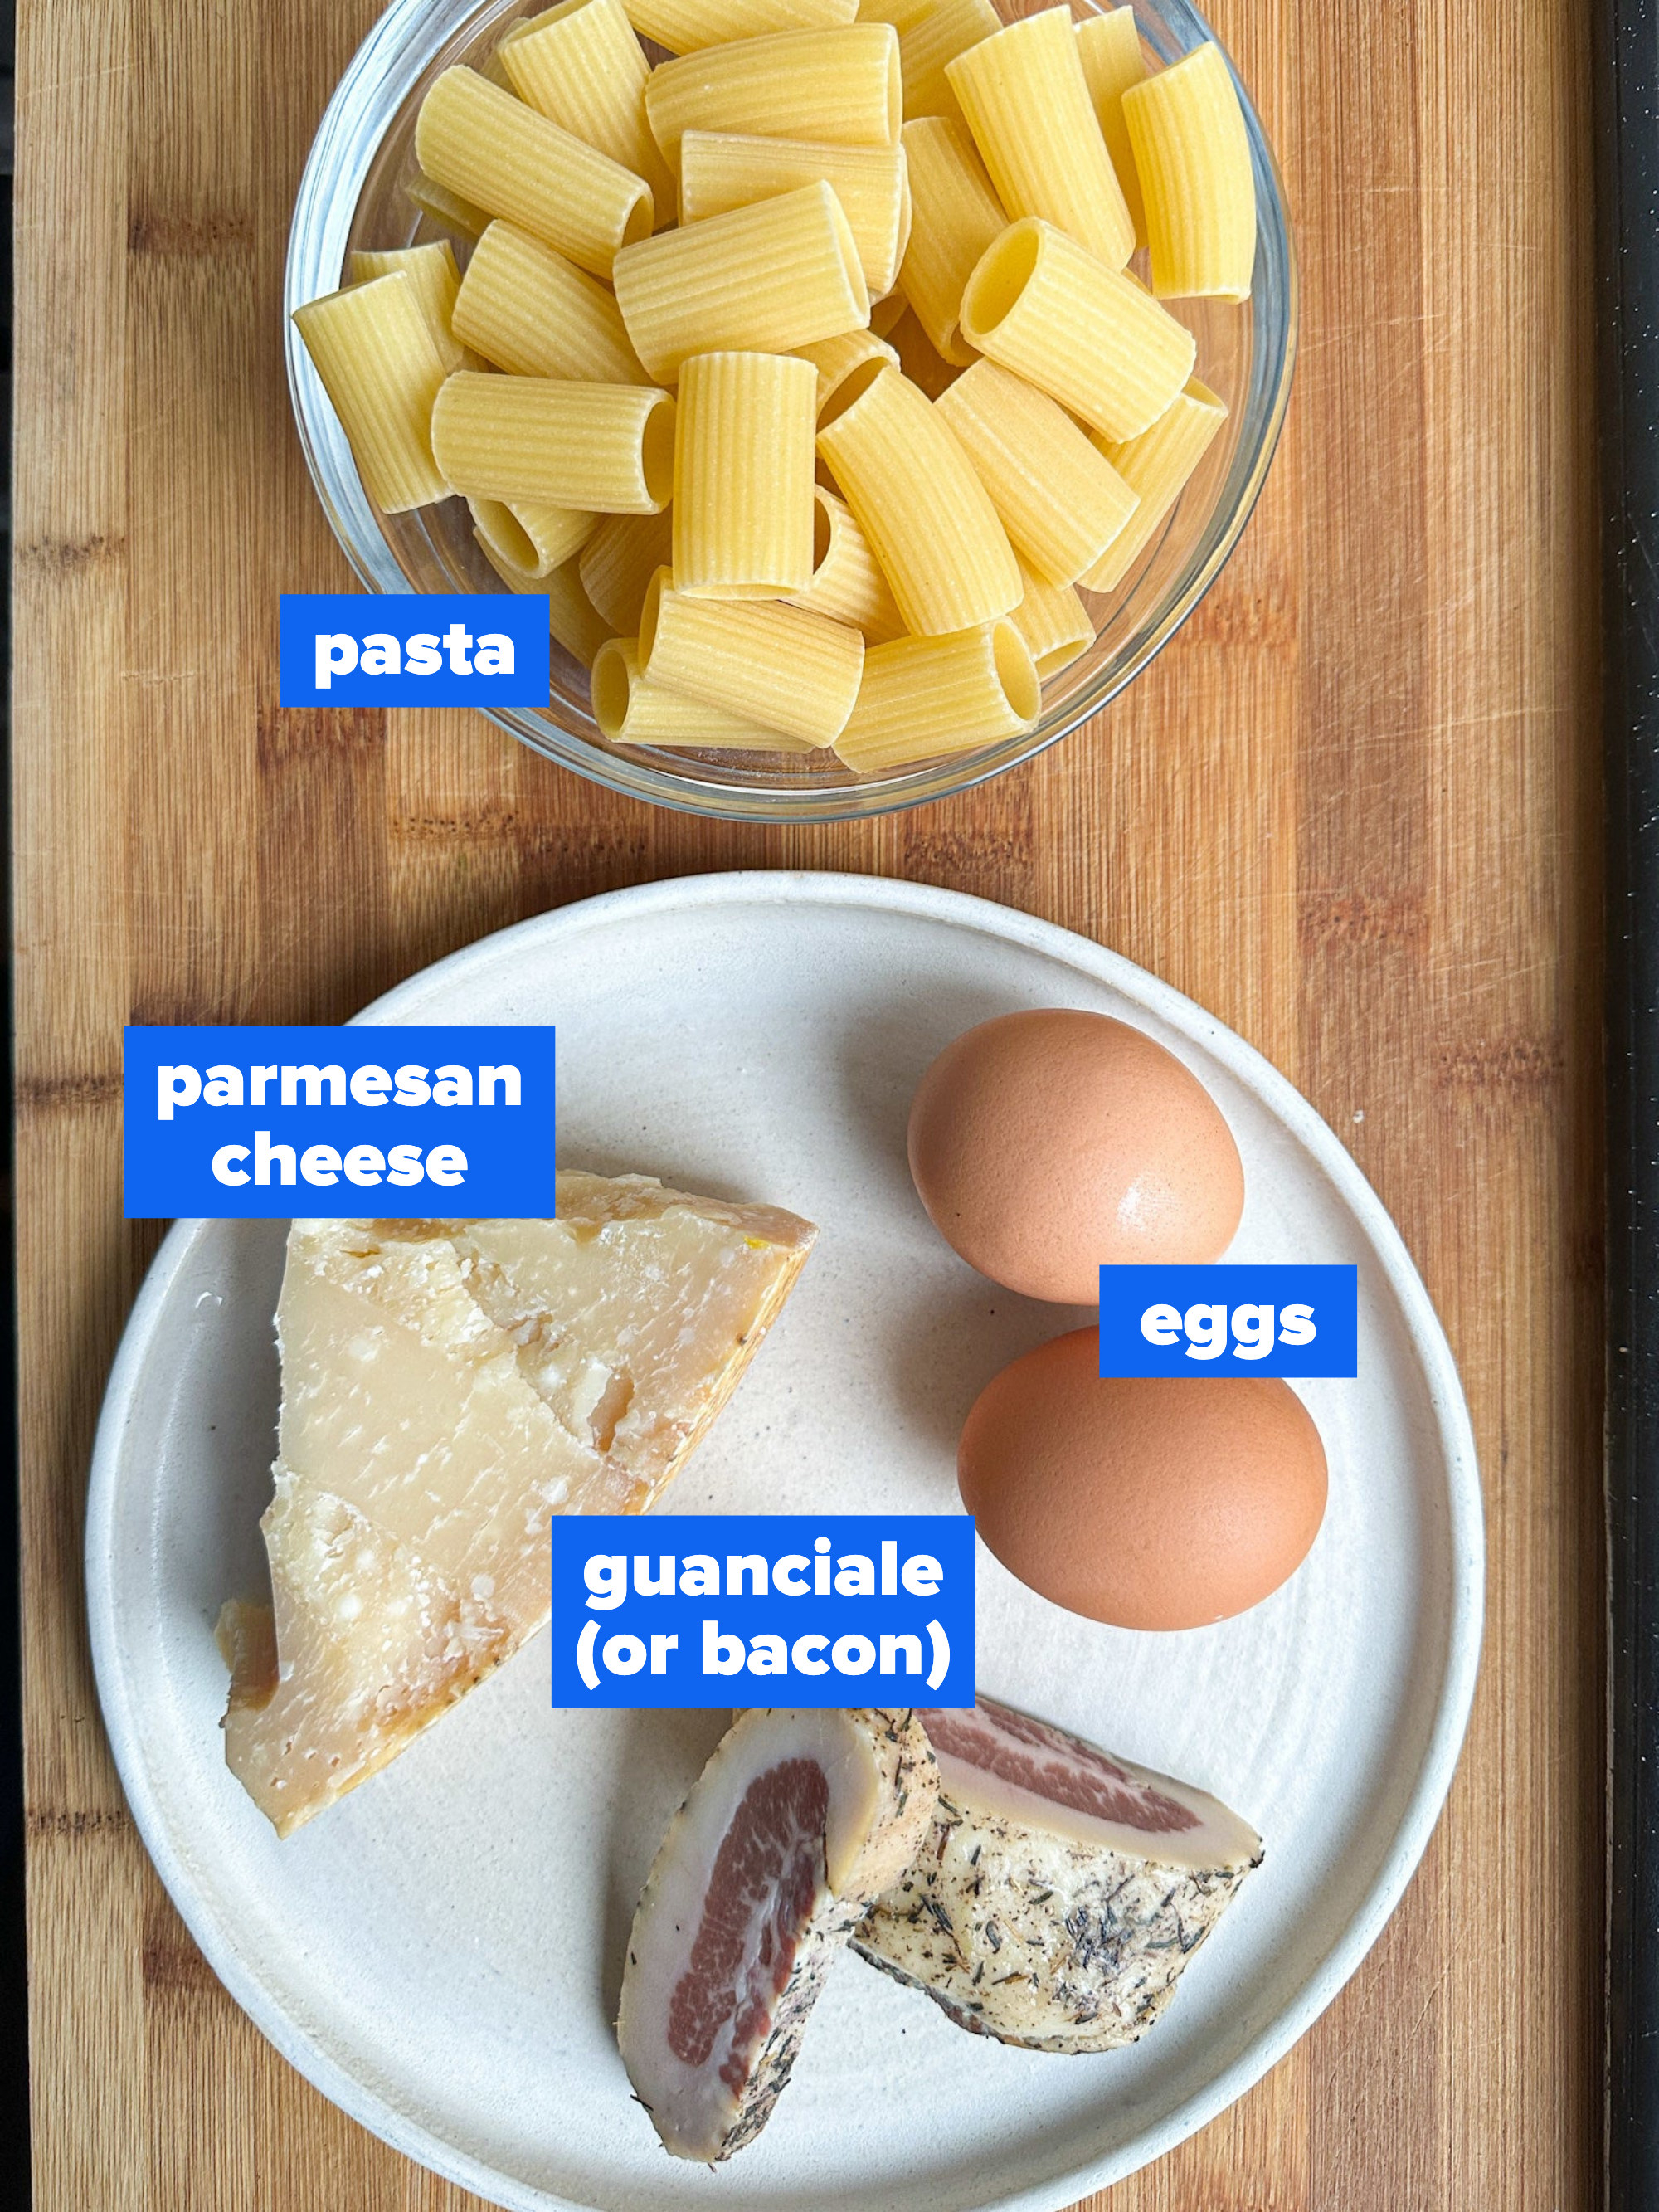 the ingredients: pasta, parmesan cheese, eggs, guanciale or bacon